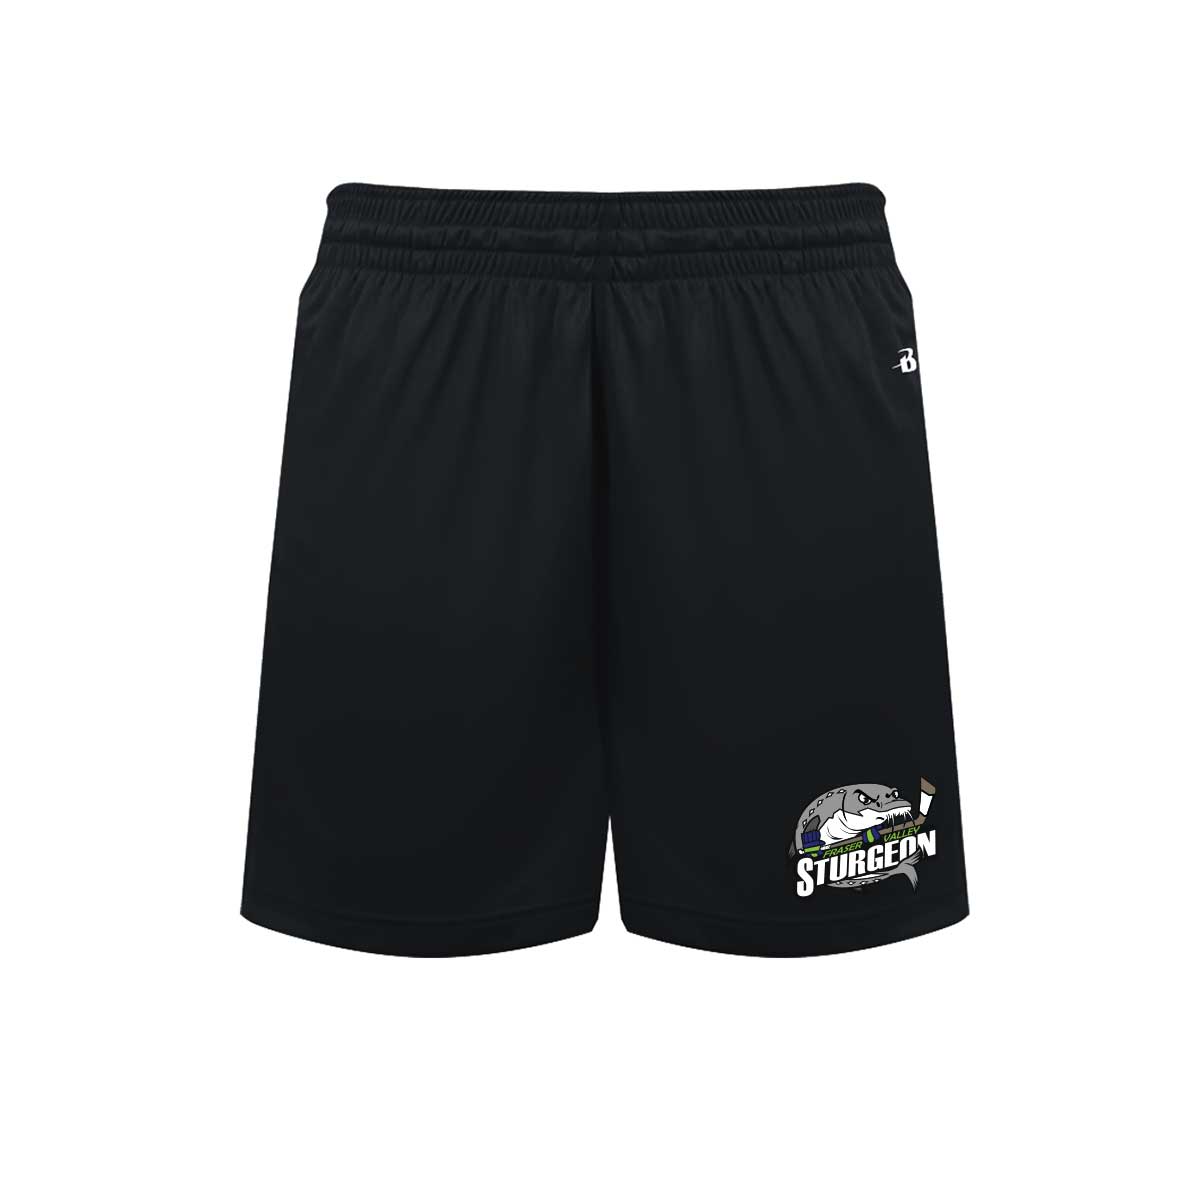 FVS -- Women's Pocketed Shorts